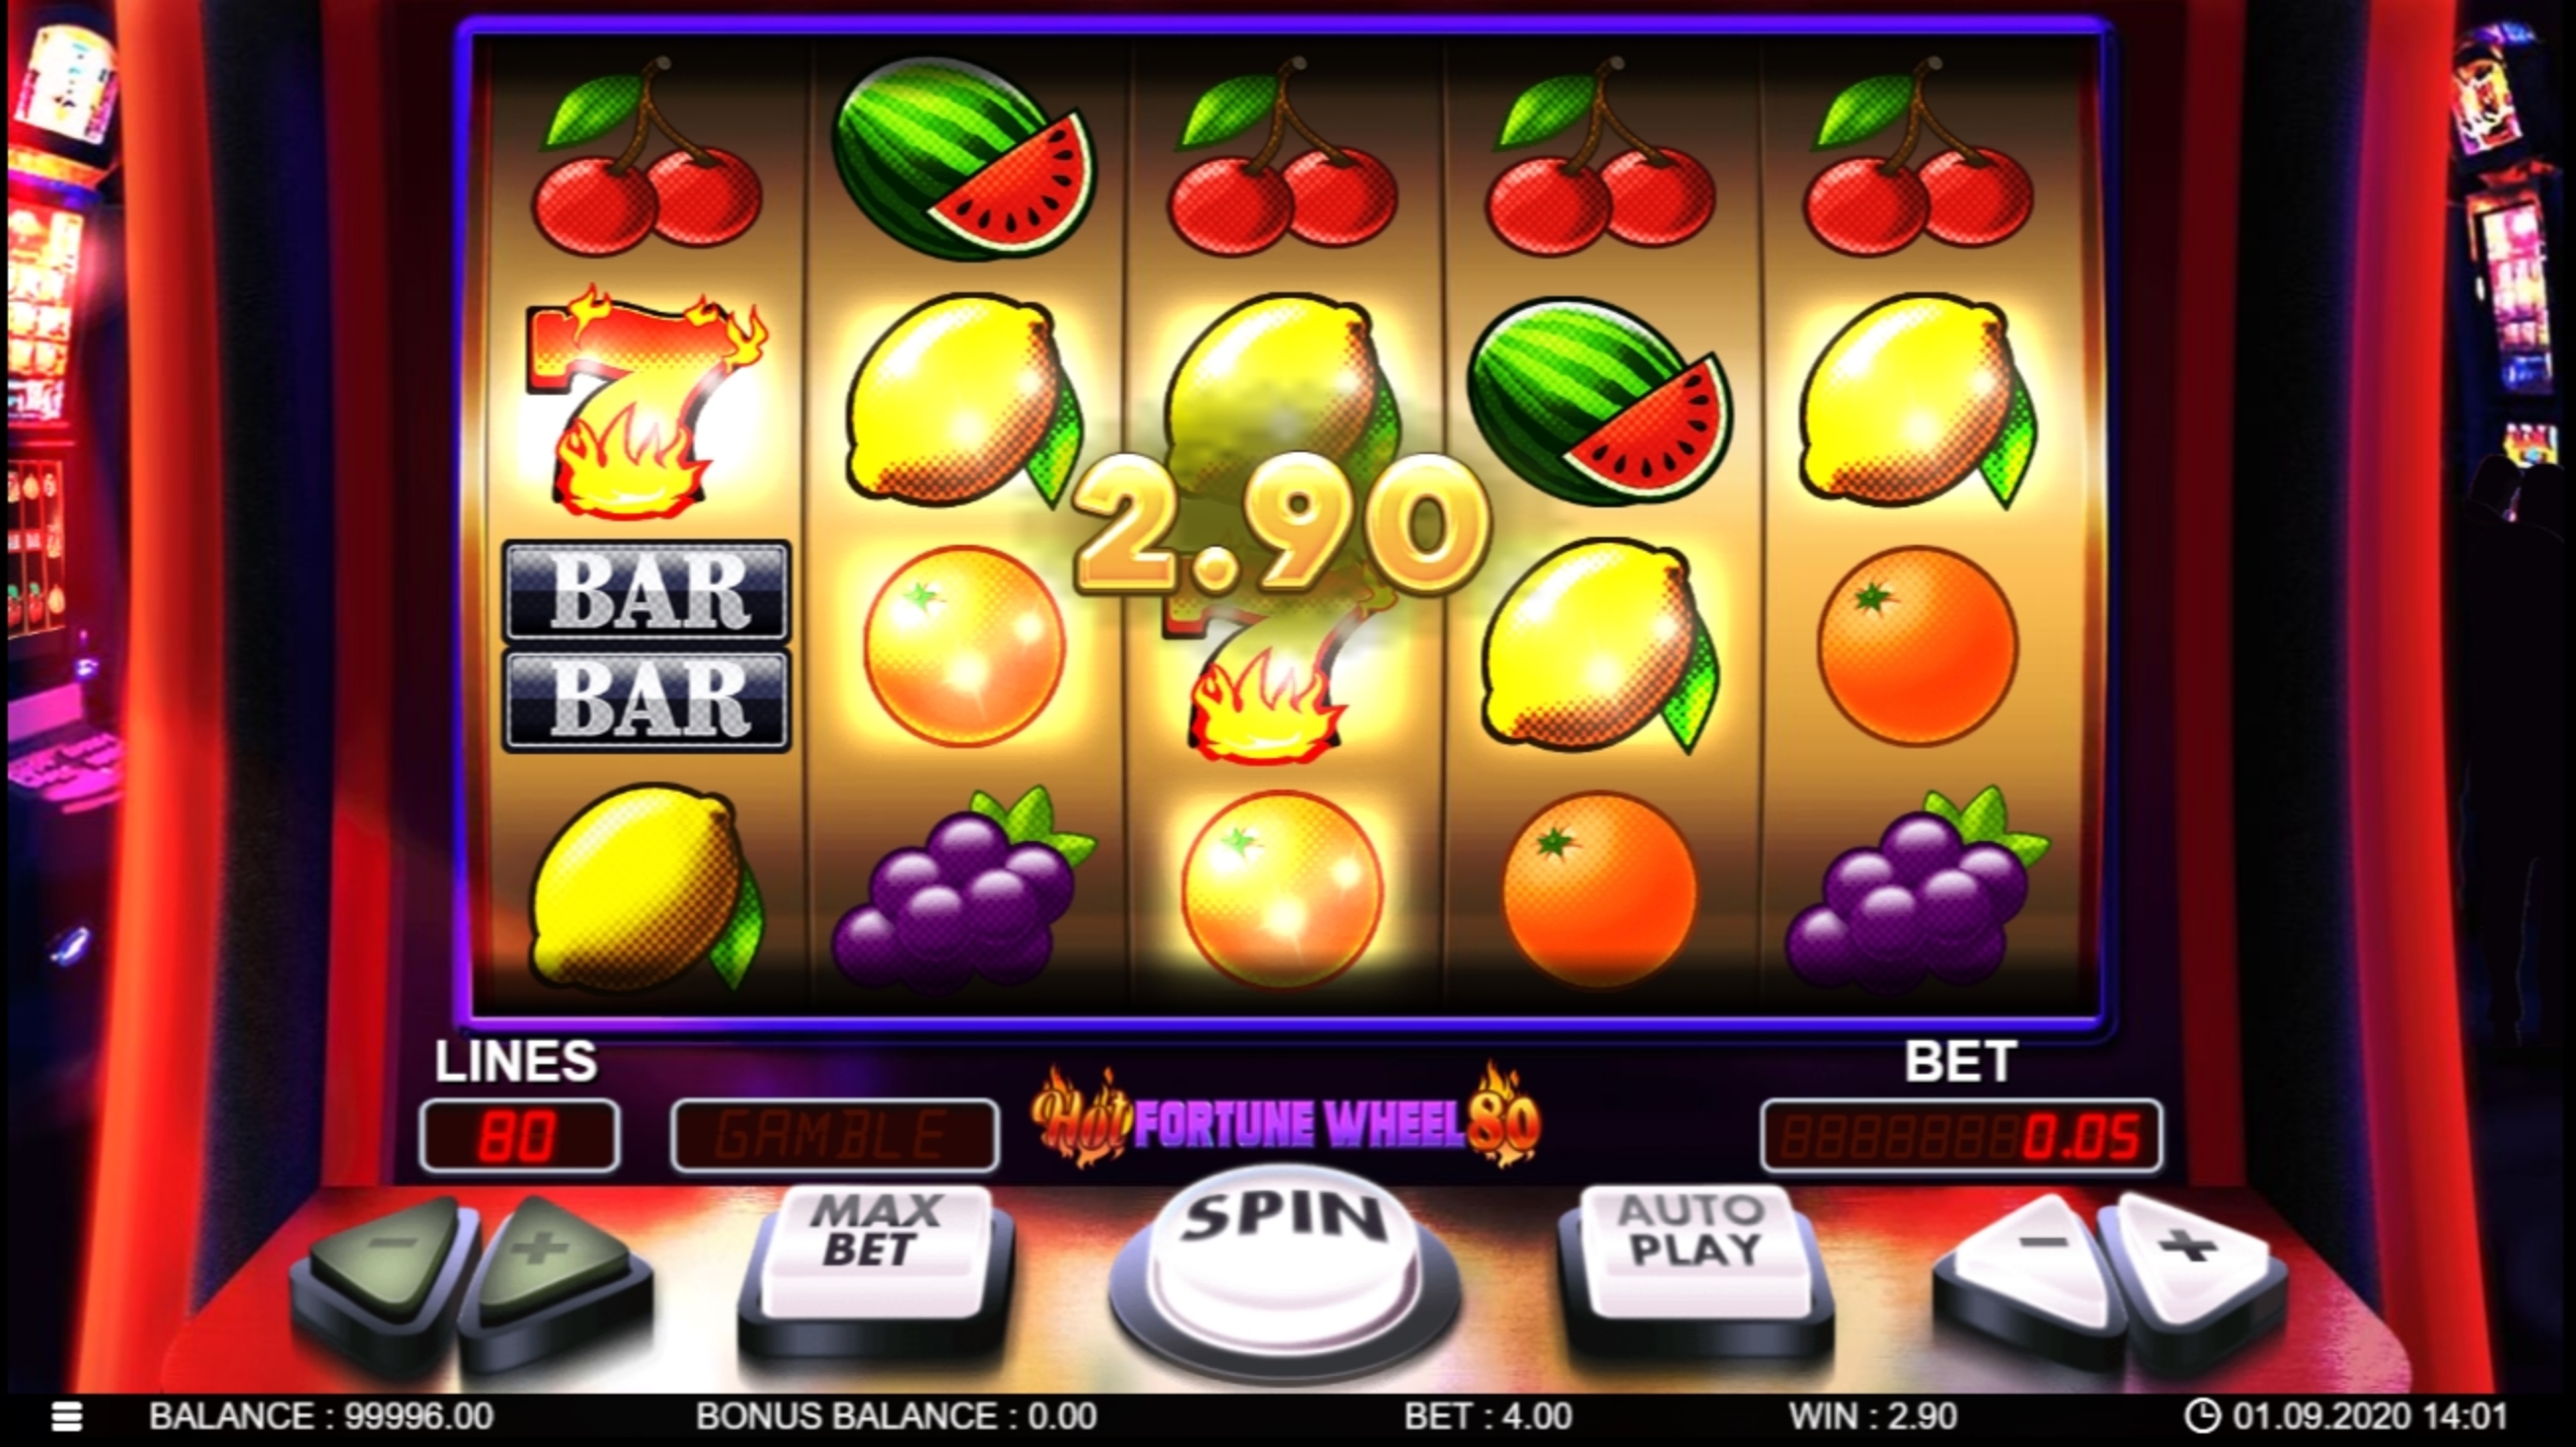 Win Money in Hot Fortune Wheel Free Slot Game by 7mojos